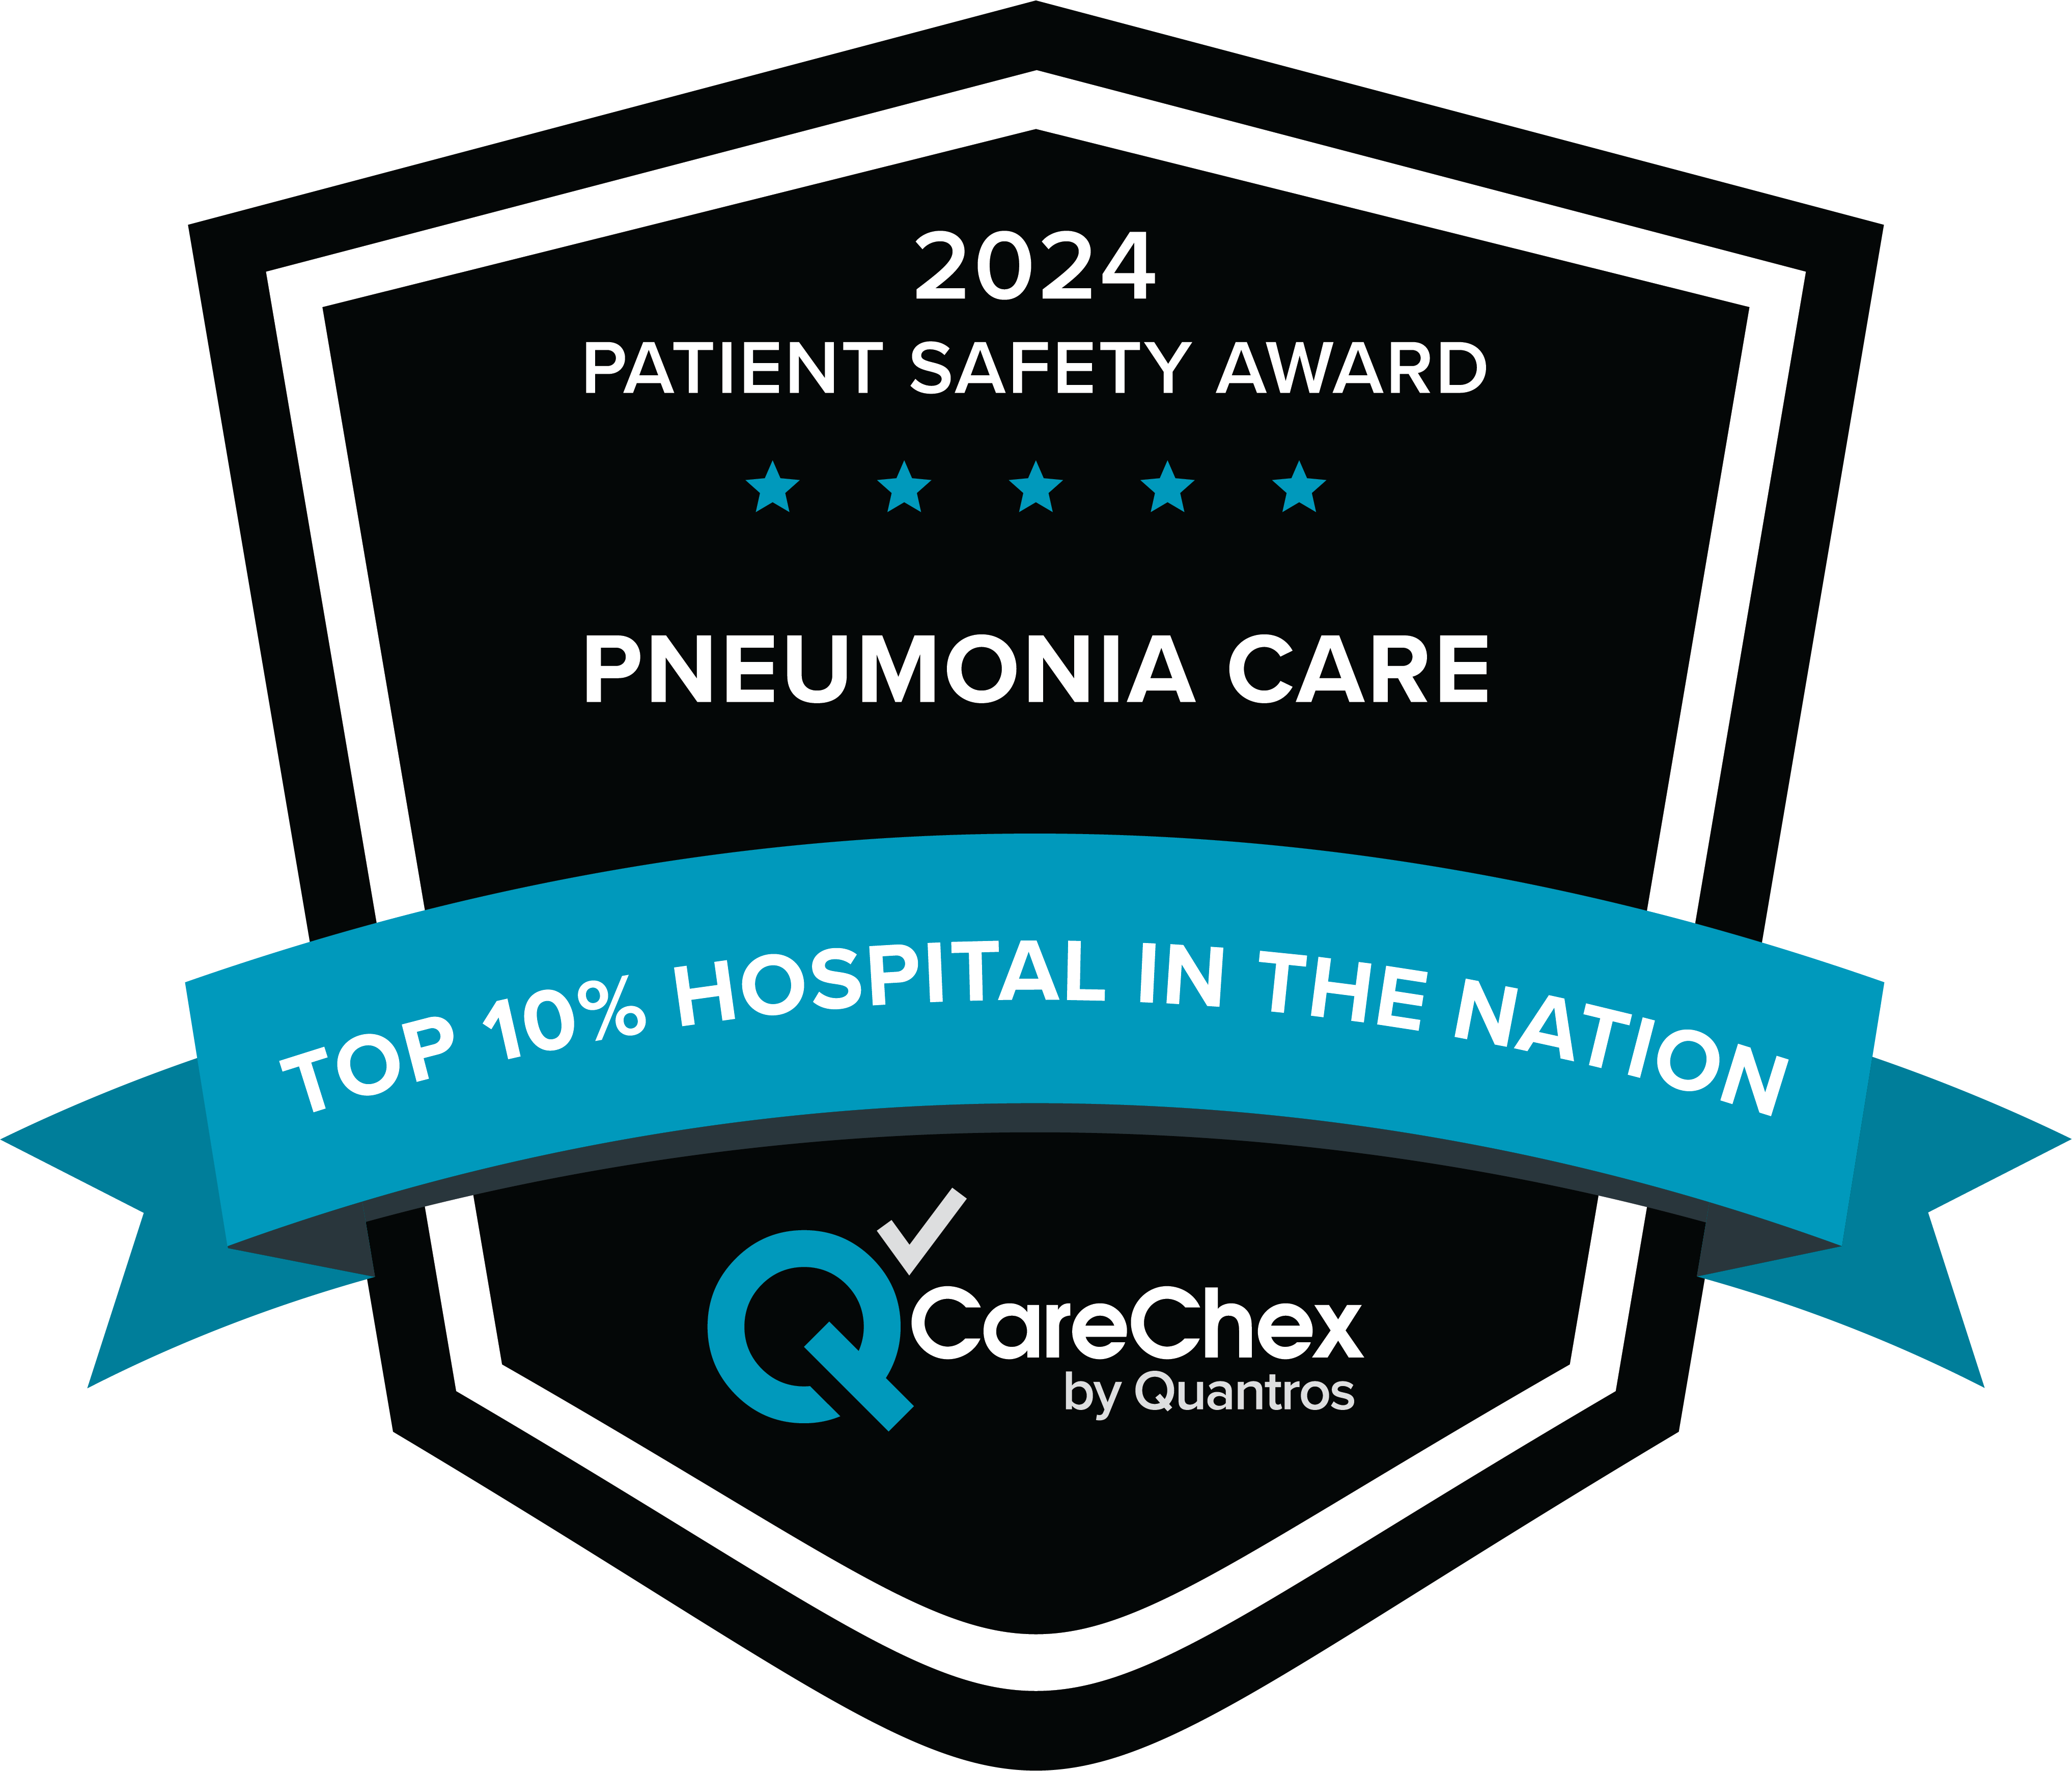 Awards badge for Top 10% Hospital in the Nation for Patient Safety in Pneumonia Care – 2024 CareChex by Quantros